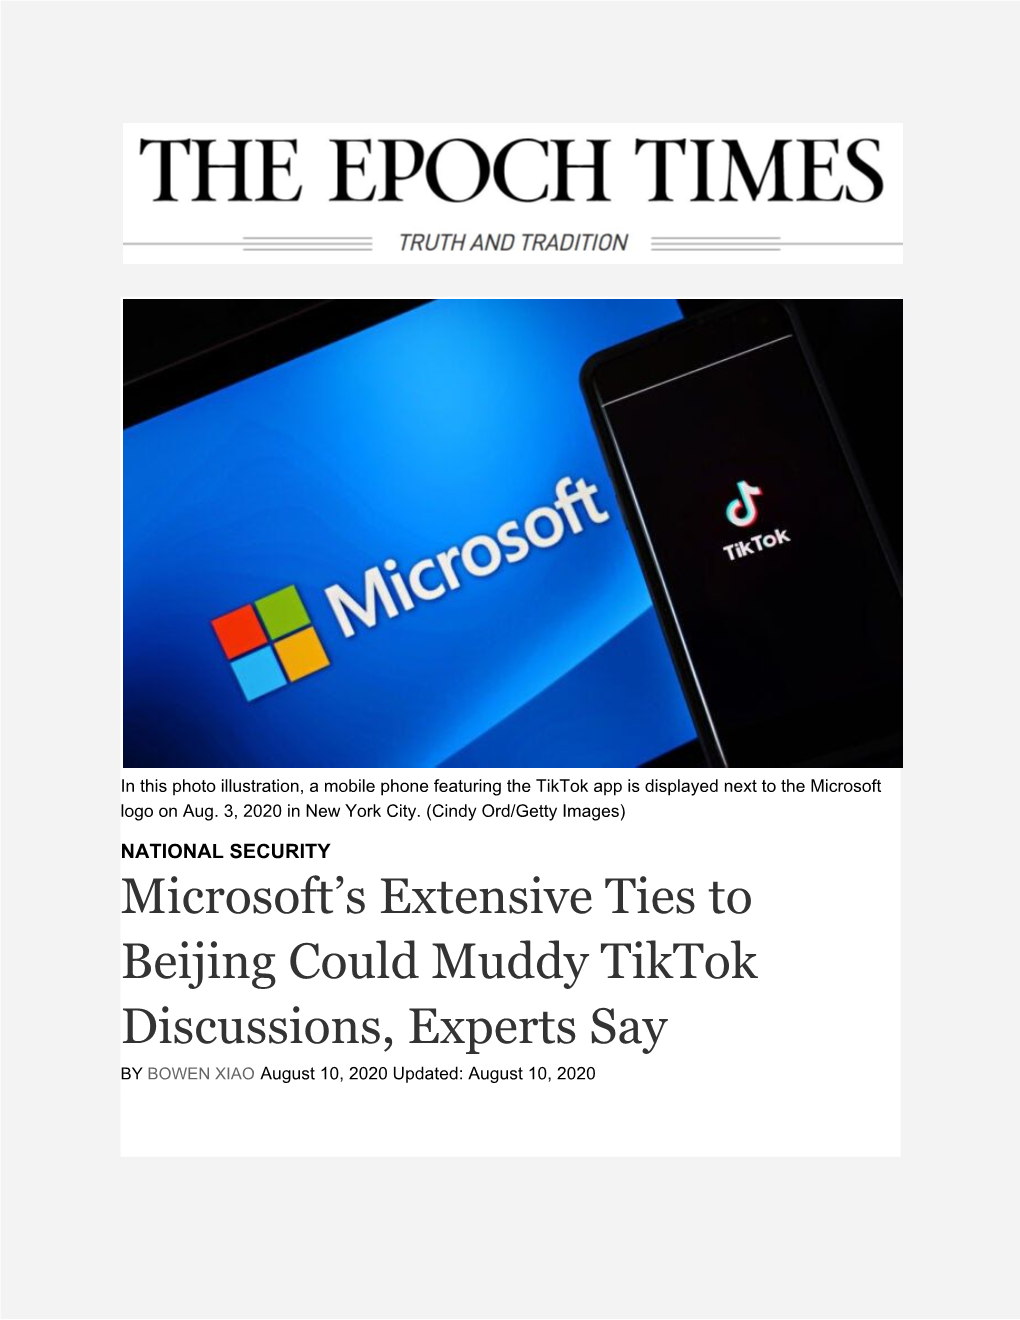 Microsoft's Extensive Ties to Beijing Could Muddy Tiktok Discussions, Experts